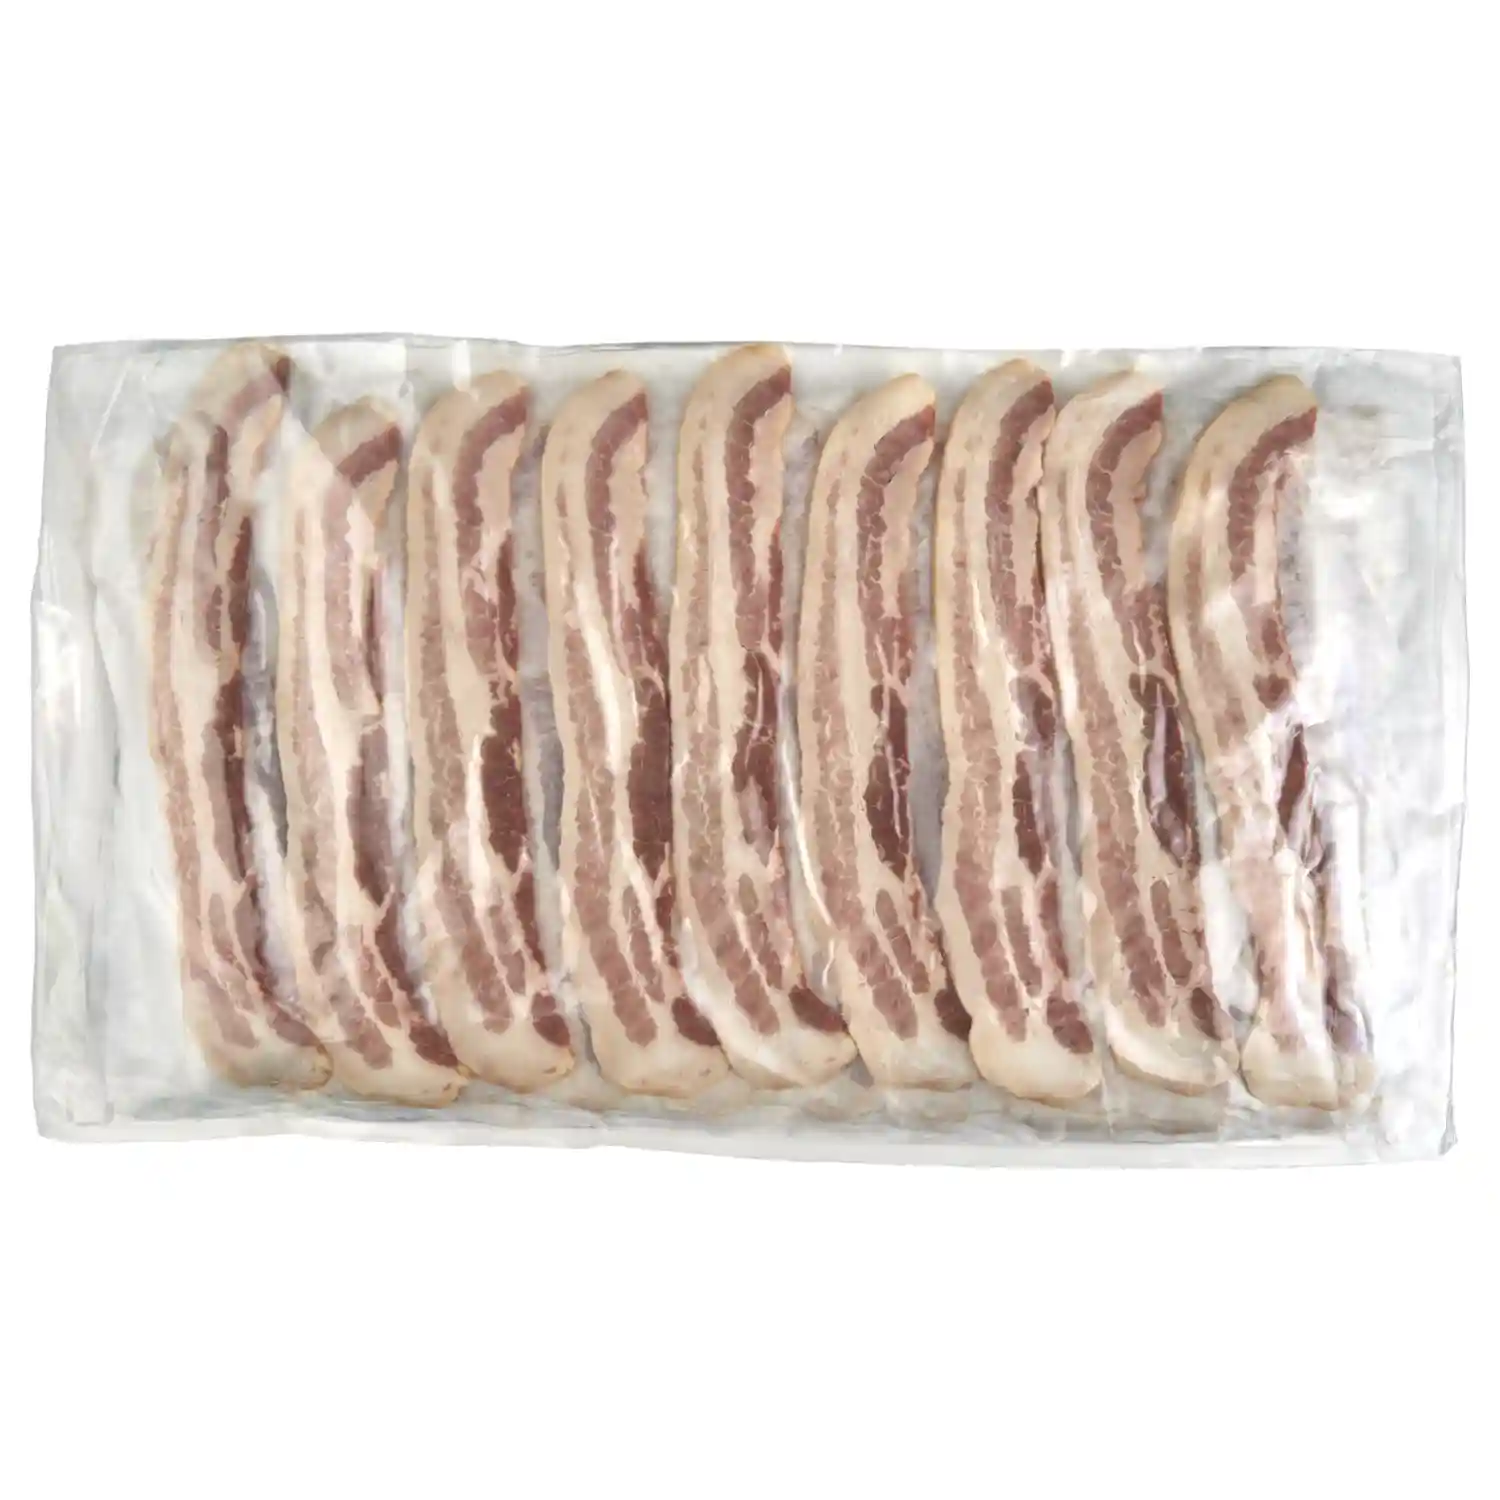 Wright® Brand Naturally Hickory Smoked Thin Sliced Bacon, Flat Pack, 15Lbs, 18-22 Slices per Pound, Gas Flushed_image_31